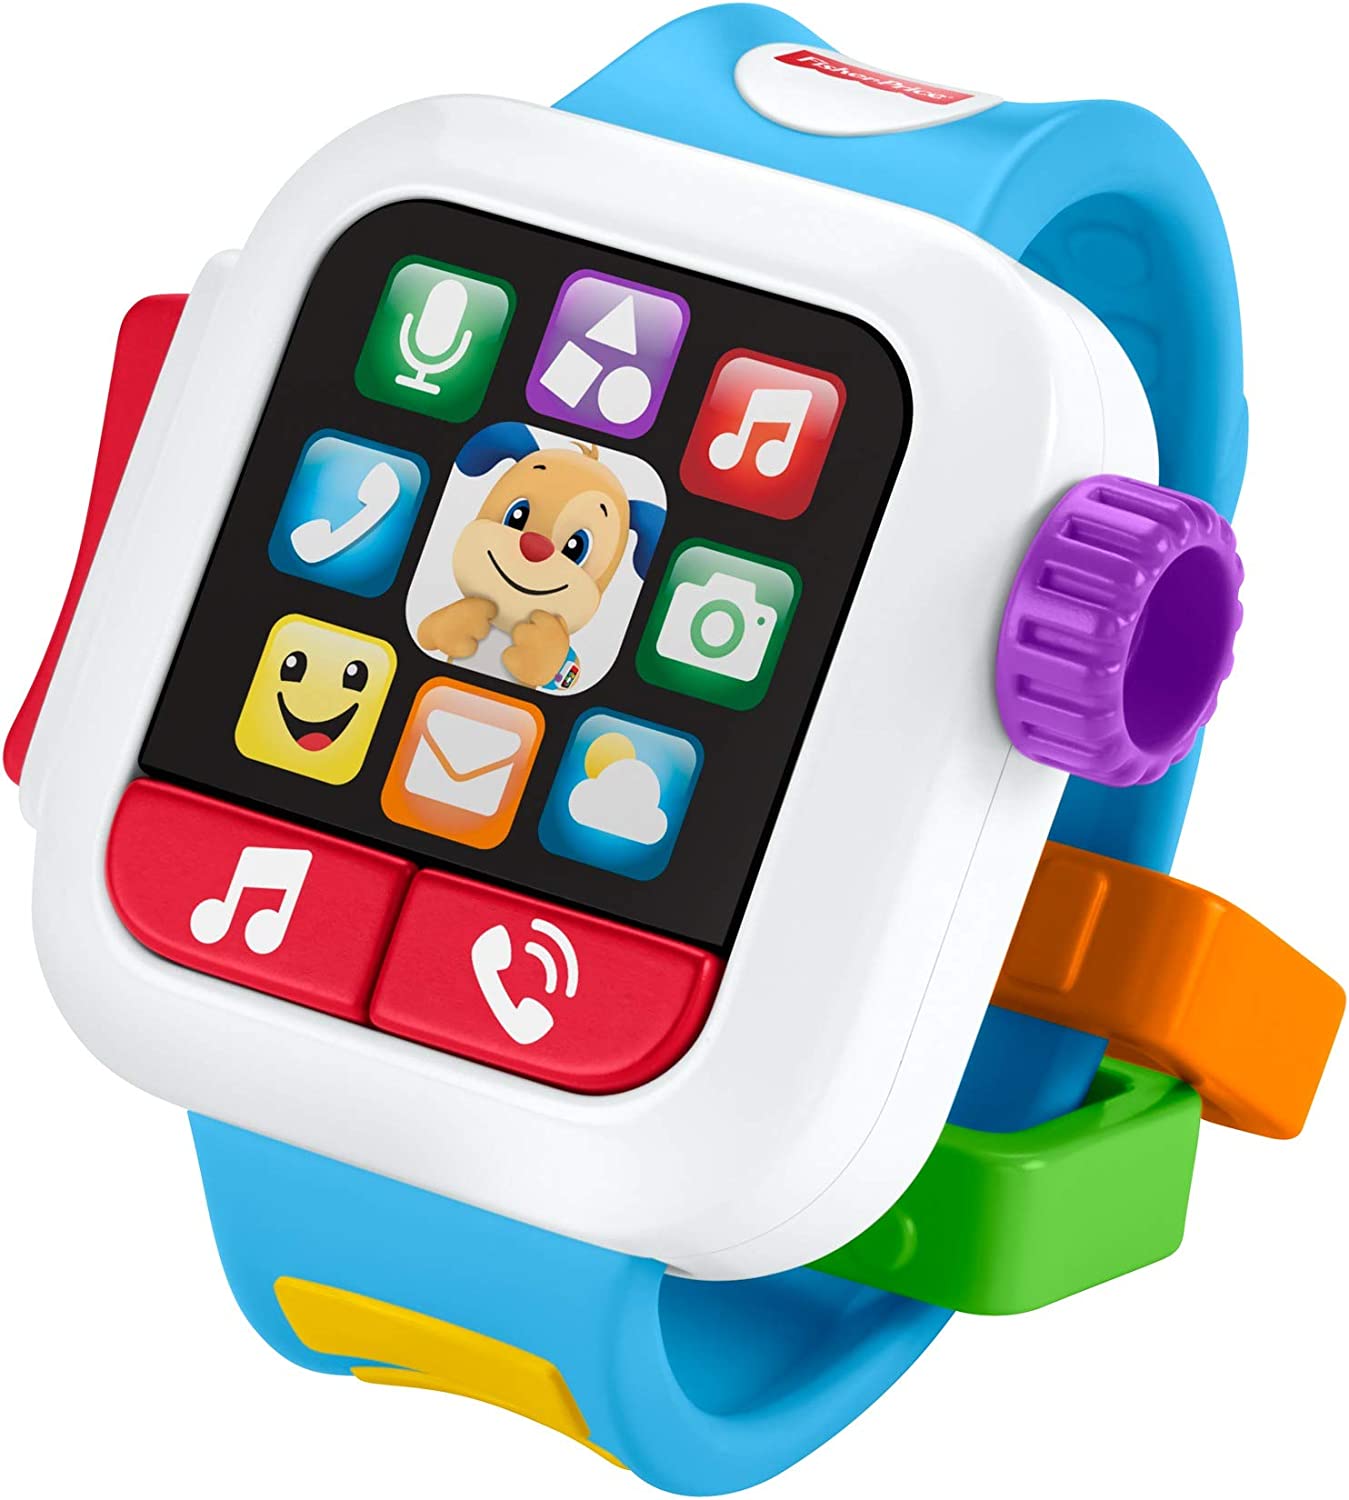 Fisher-Price Laugh & Learn Time to Learn Smartwatch, Smart Watch Activity Toy